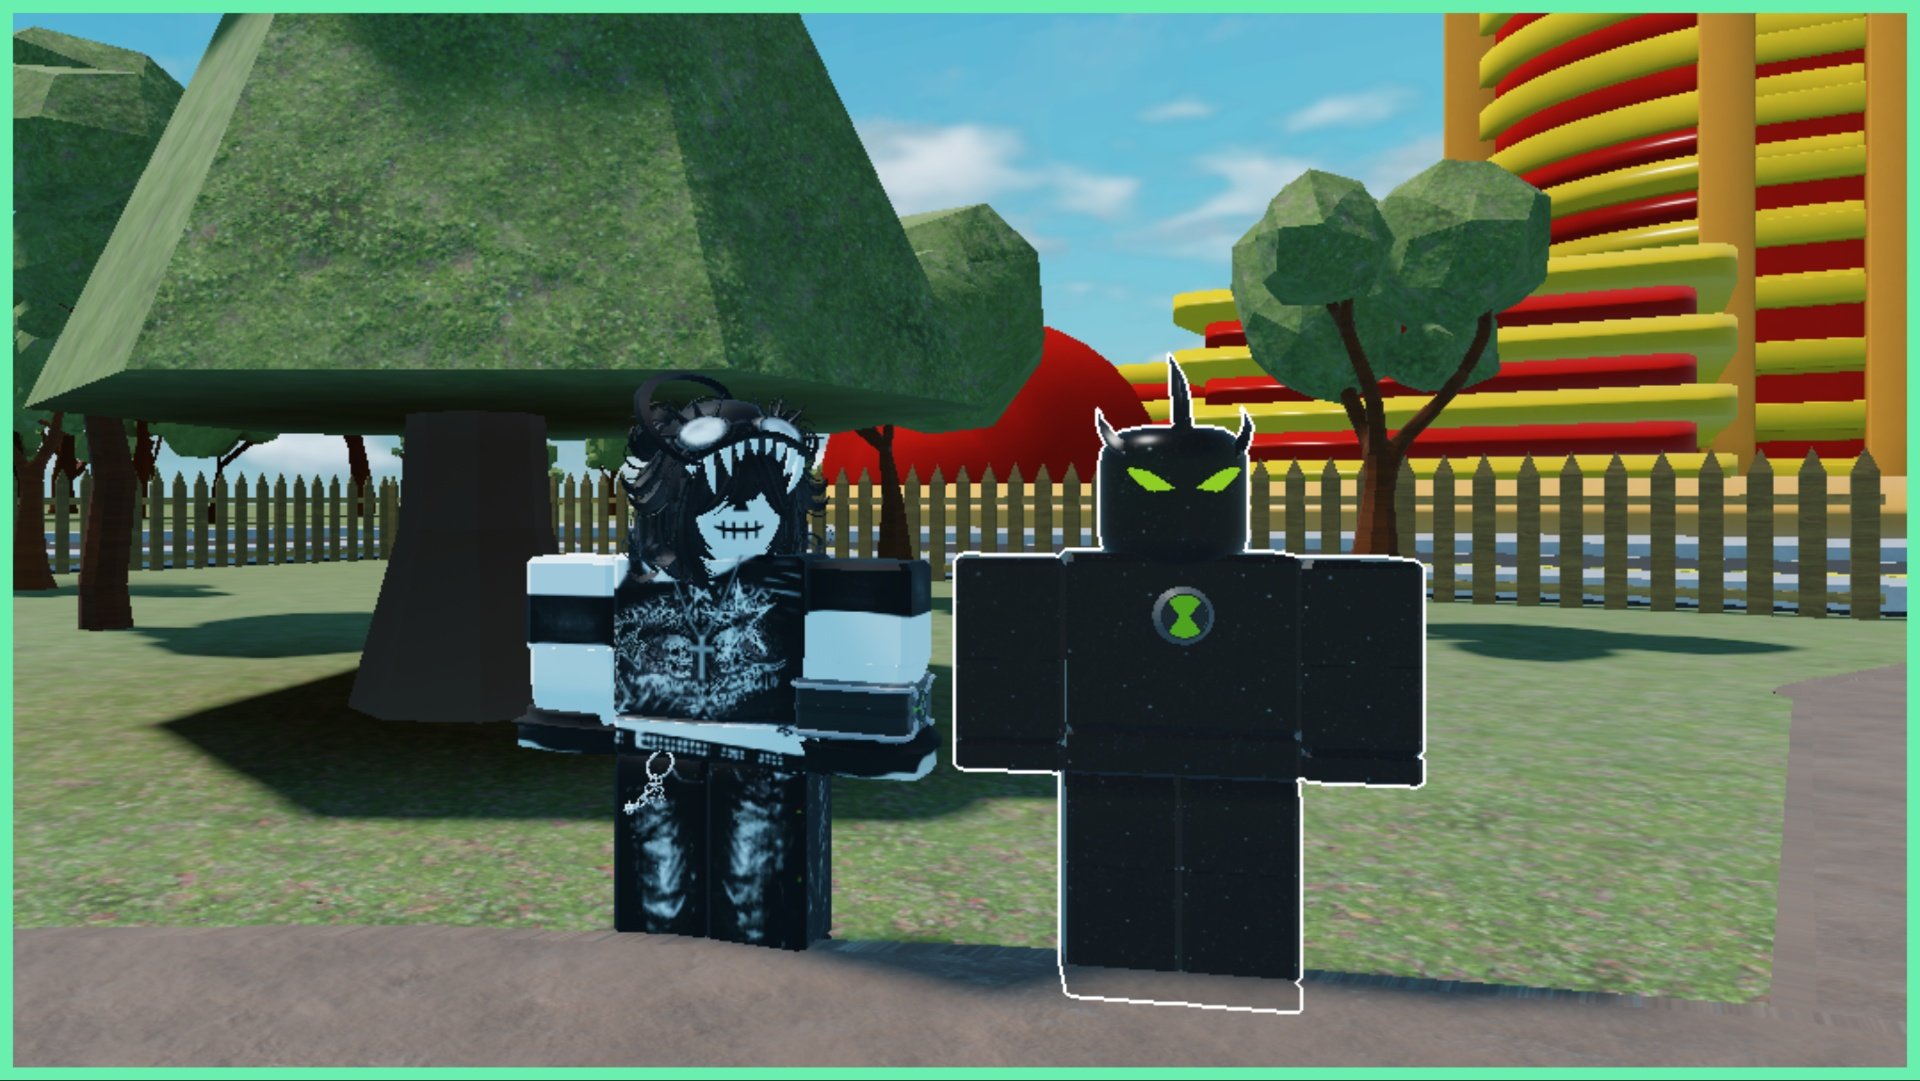 The image shows my avatar stood beside alien x from omini x in the spawn lobby of the game next to the billions building. Beside the two characters are trees and greenery during daytime